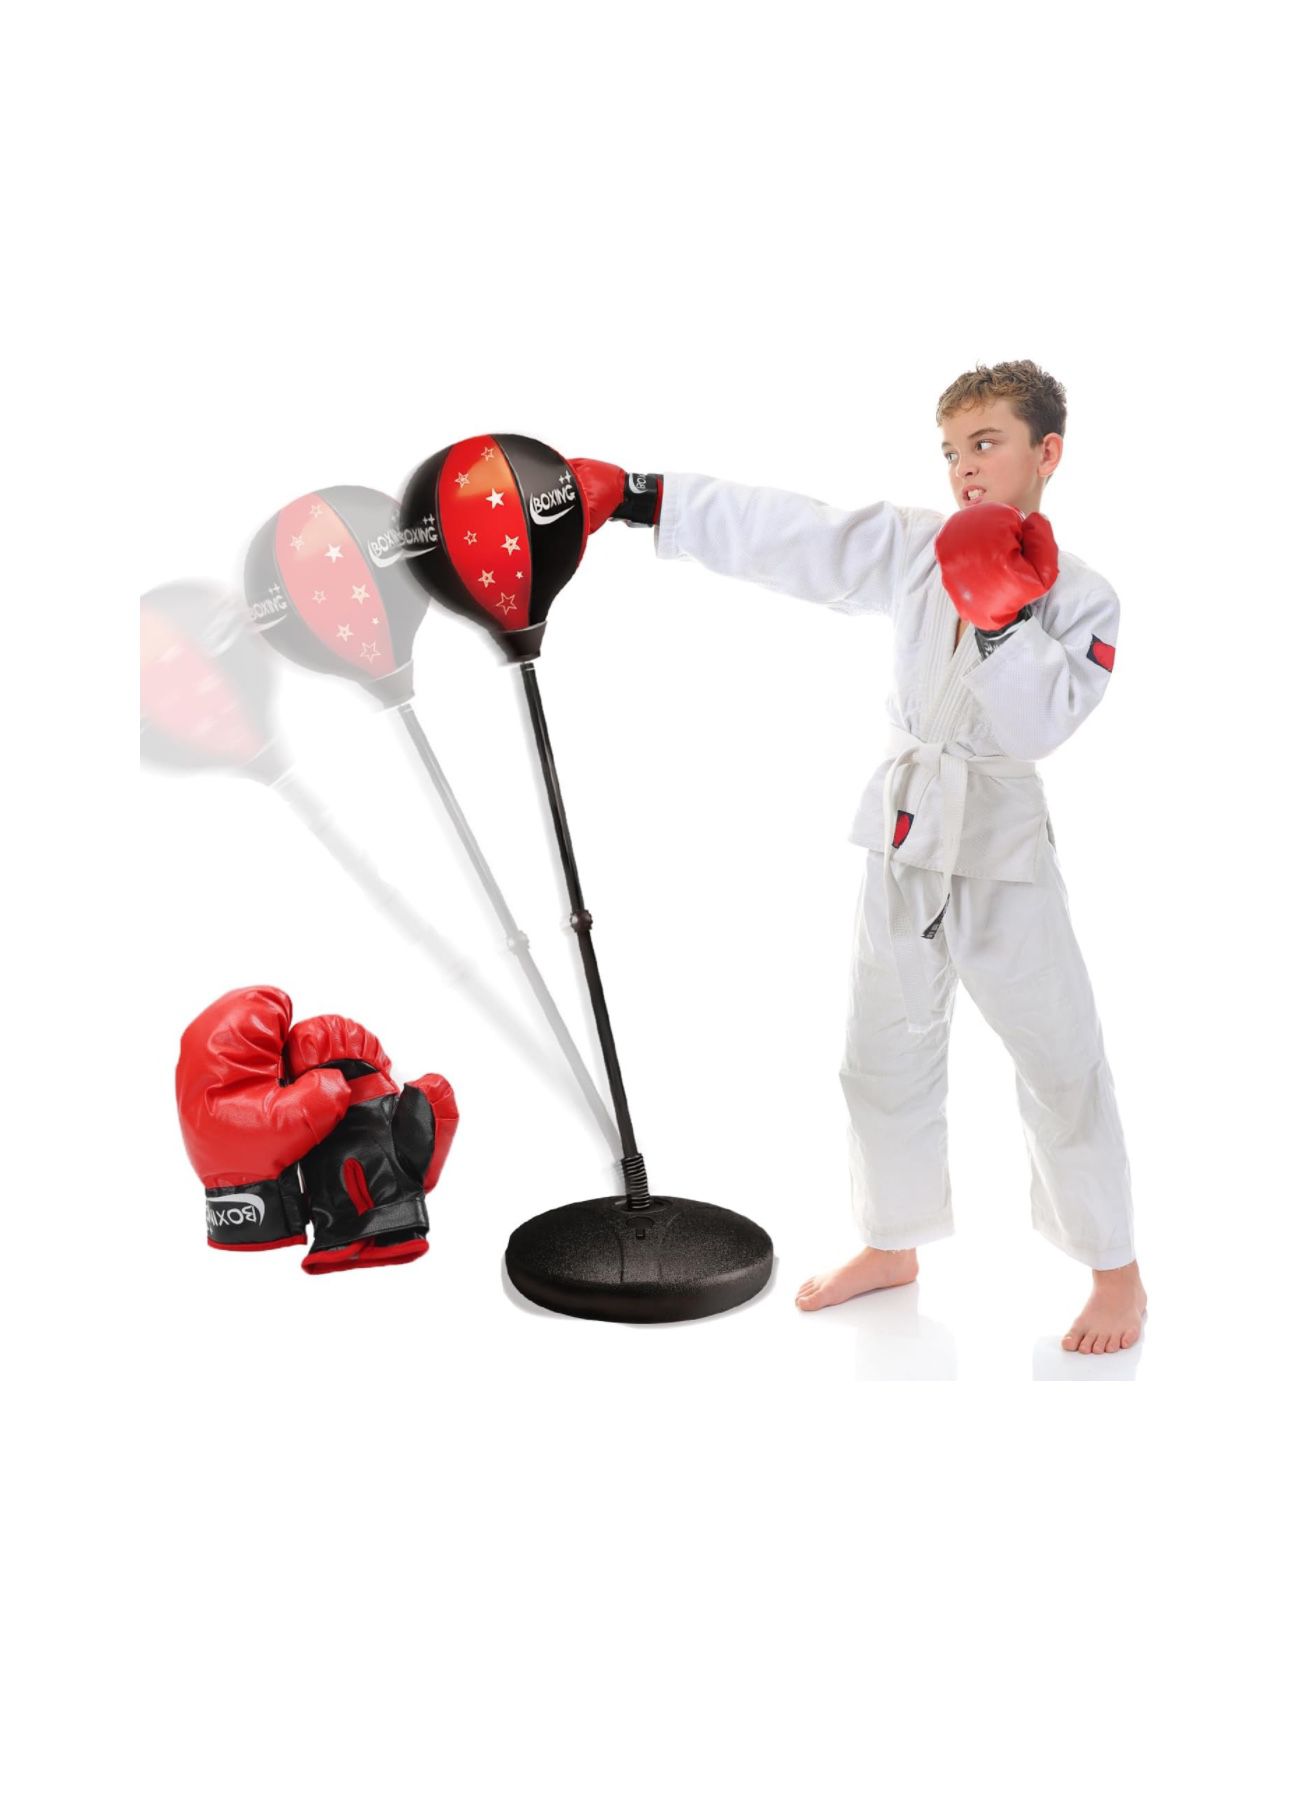 Punching Bag for Kids, Boxing Bag Toy with Boxing Gloves 